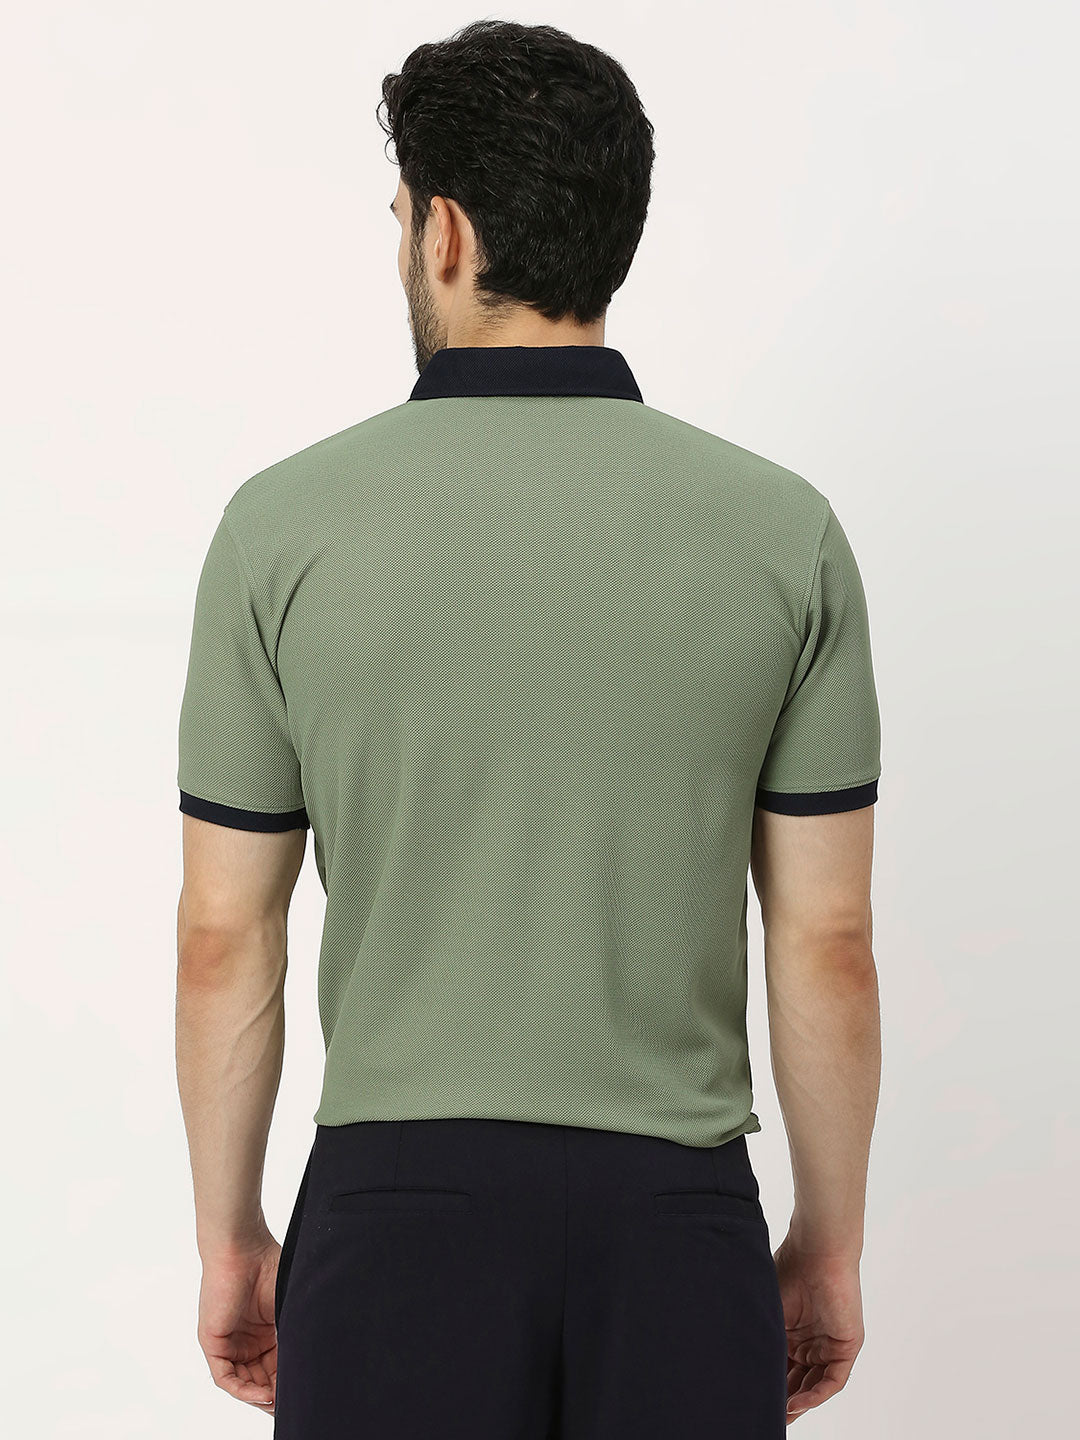 Men's Sports Polo - Olive and Navy - 1